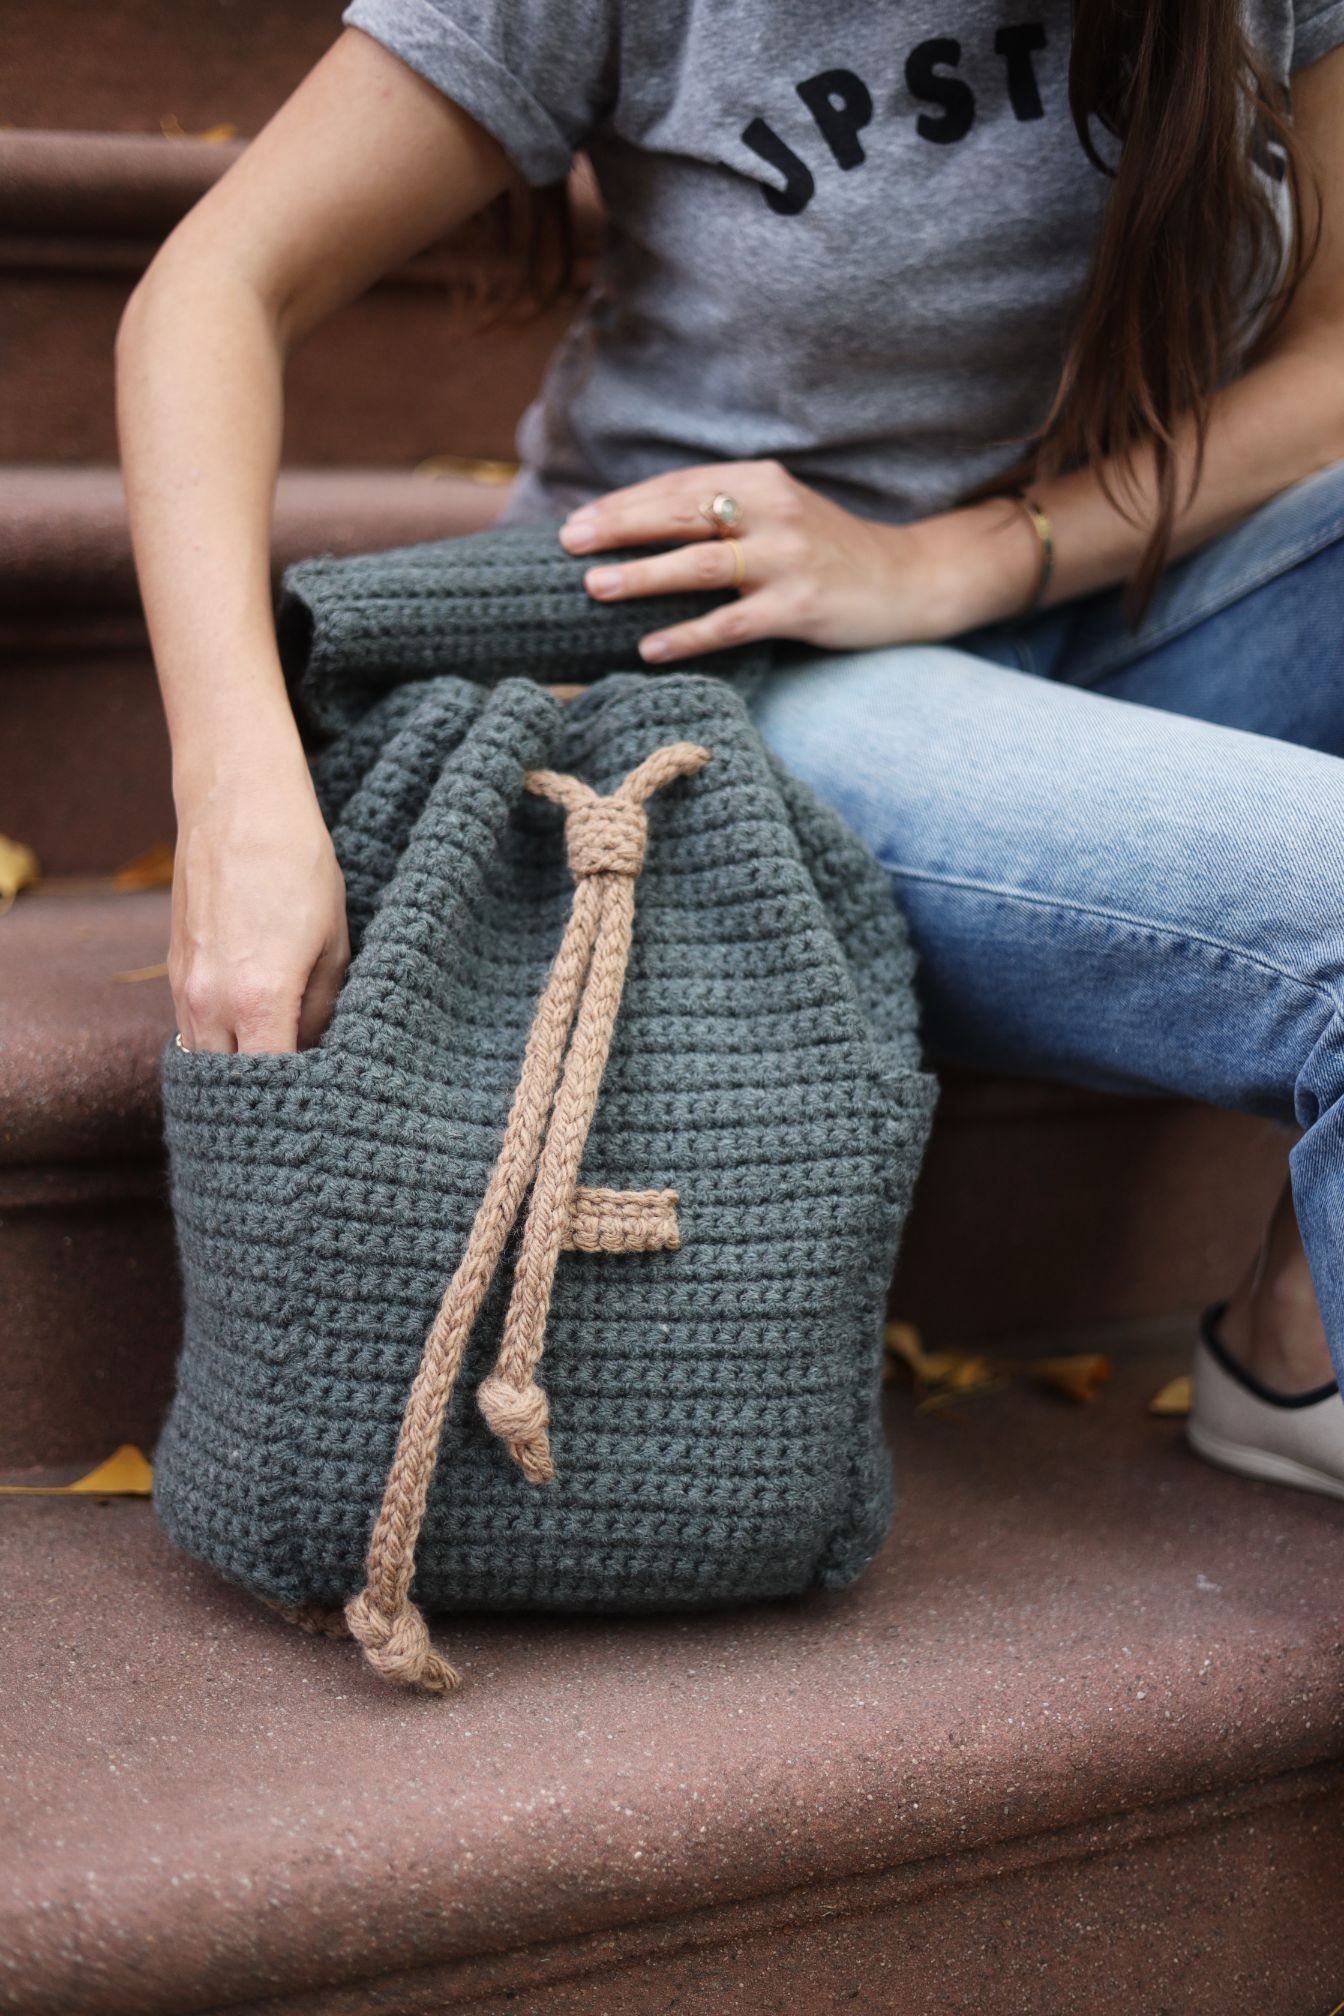 How to crochet Backpack 